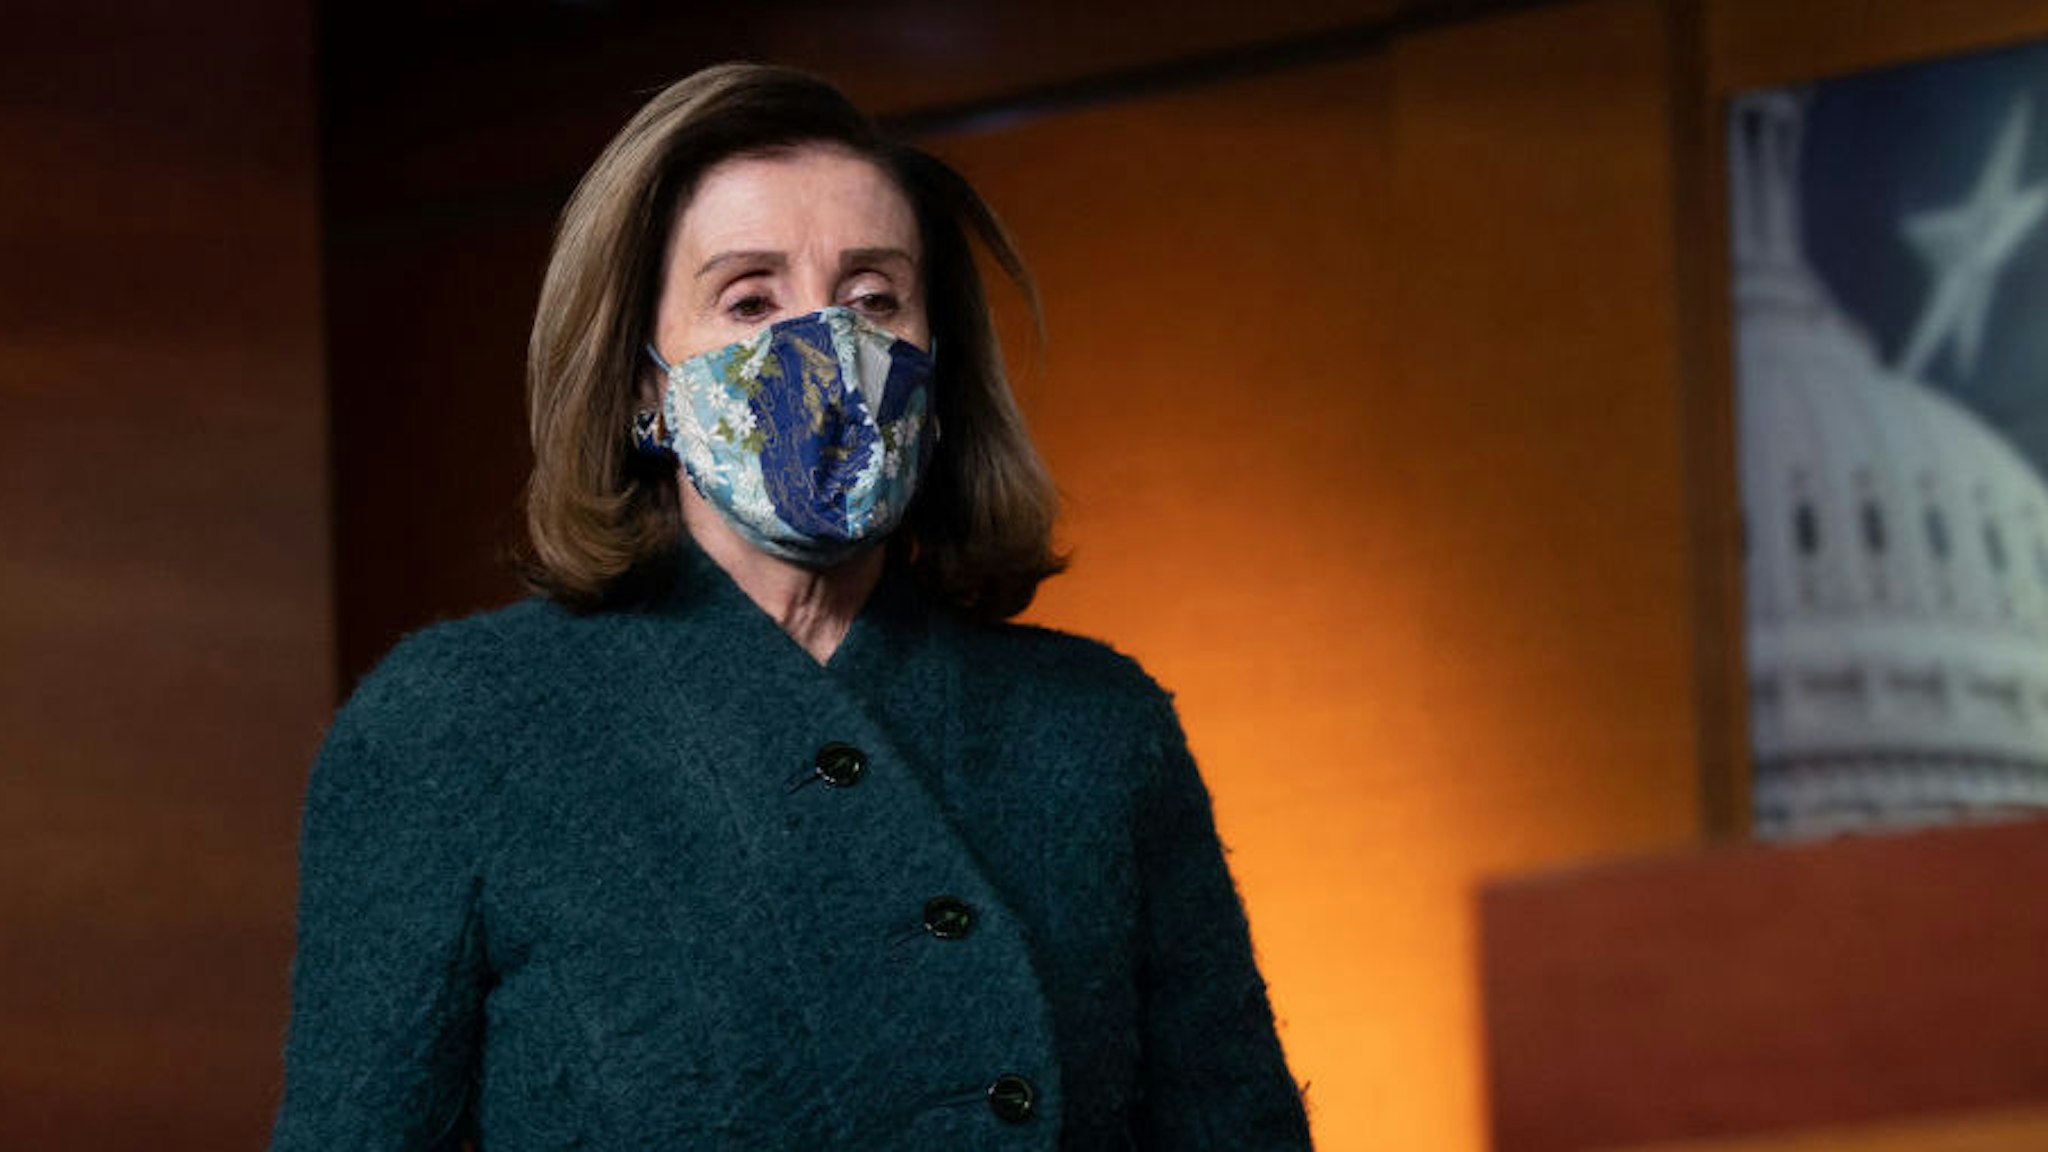 US Speaker of the House, Nancy Pelosi, Democrat of California, arrives for her weekly press briefing on Capitol Hill in Washington, DC, on January 28, 2021.